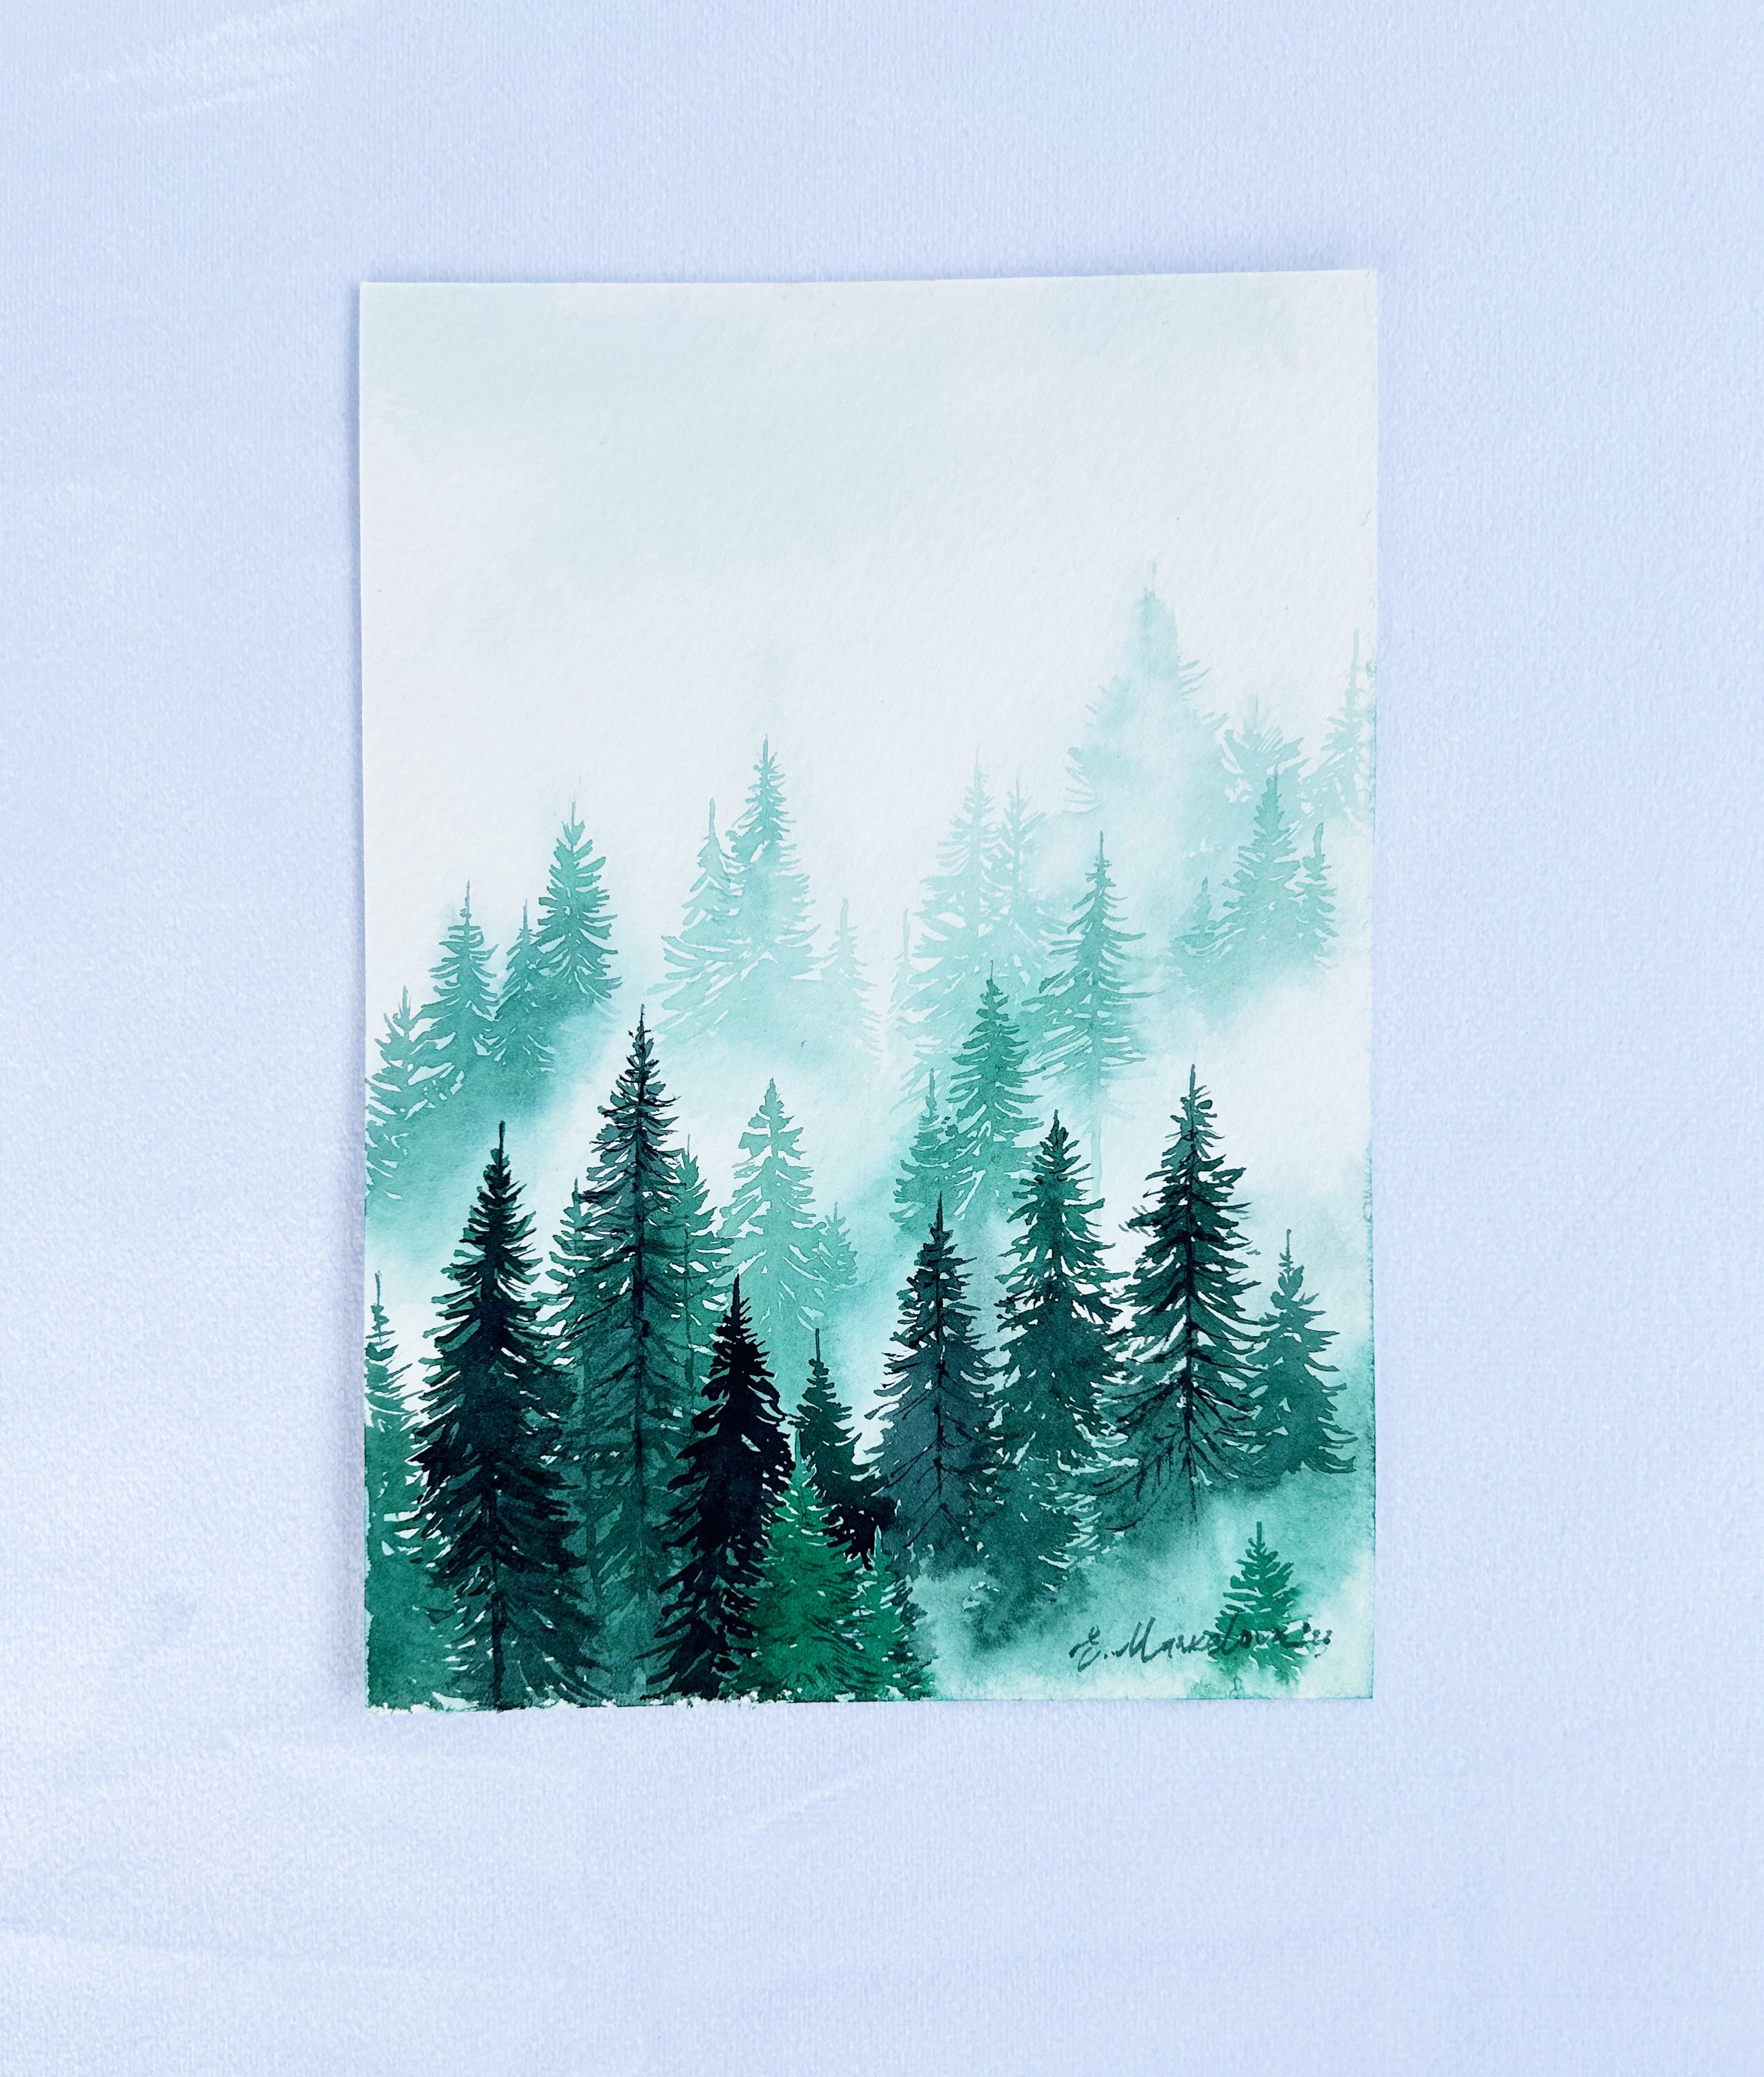 Tranquility I - Original Watercolor Painting